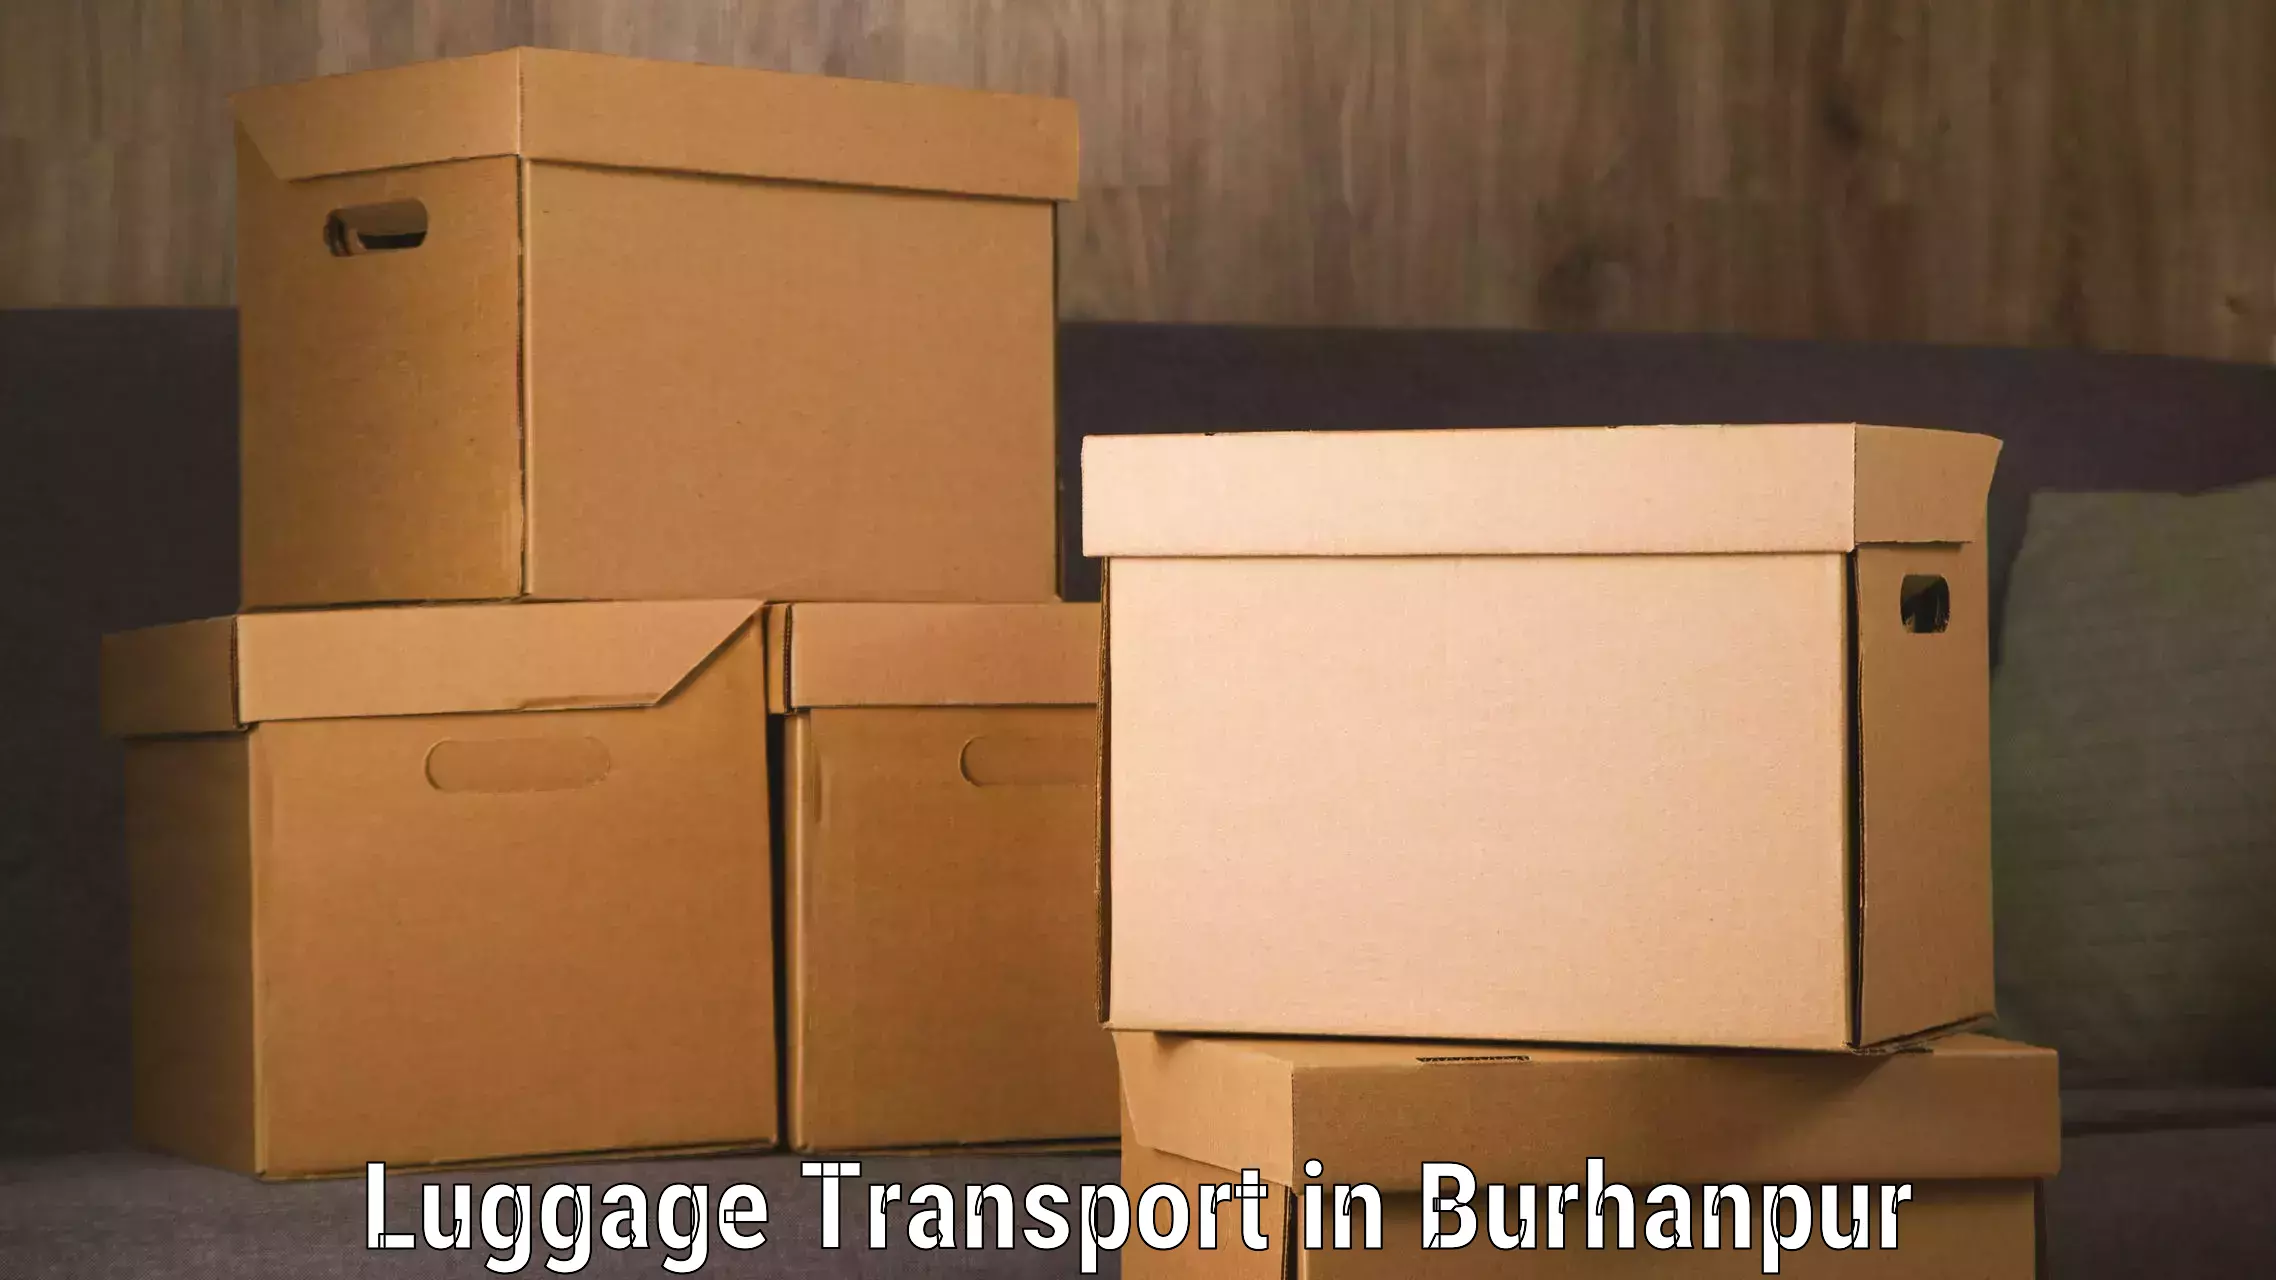 Affordable luggage shipping in Burhanpur